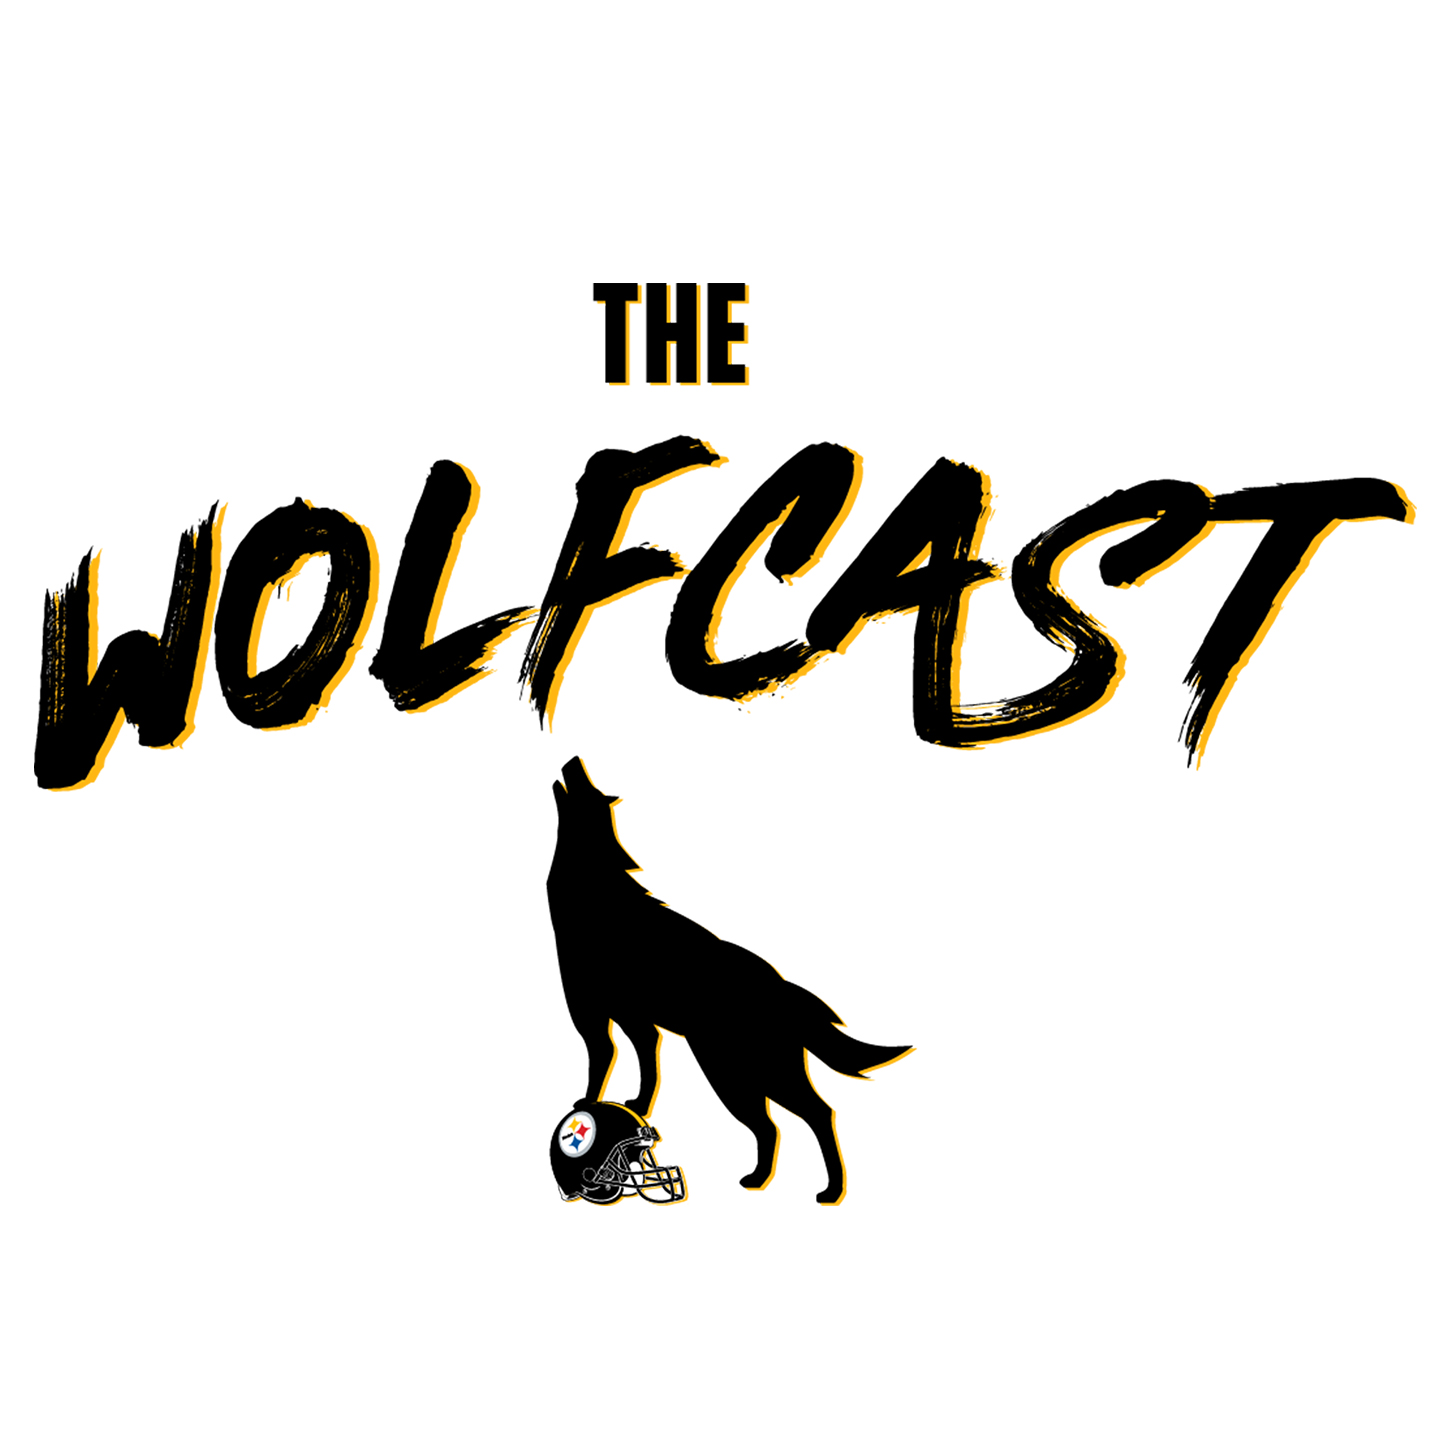 The Wolfcast